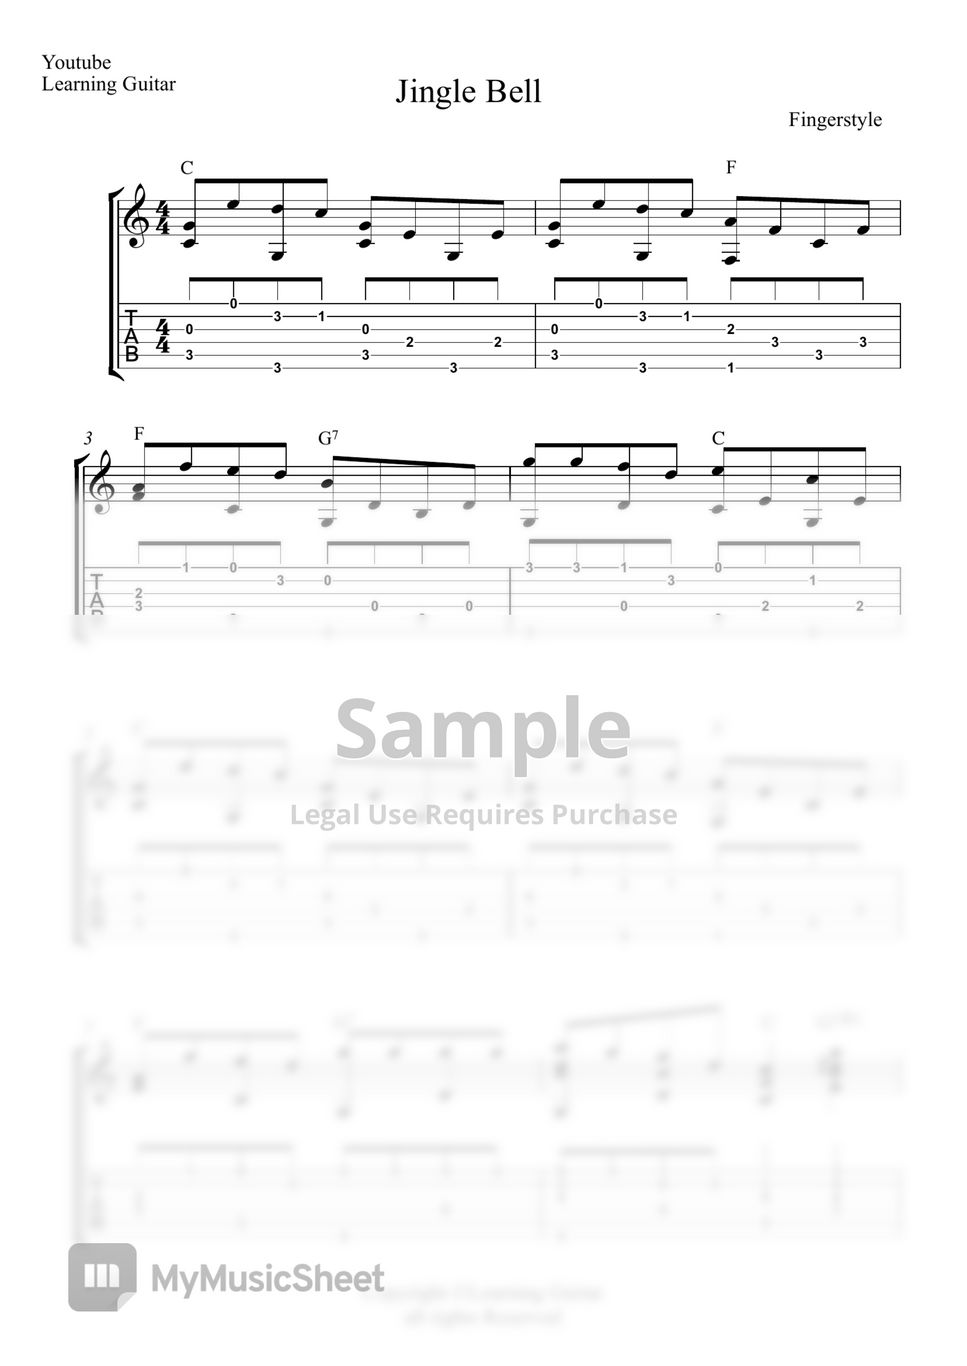 James Lord Pierpont - Jingle Bell (Guitar TAB) by Learning Guitar